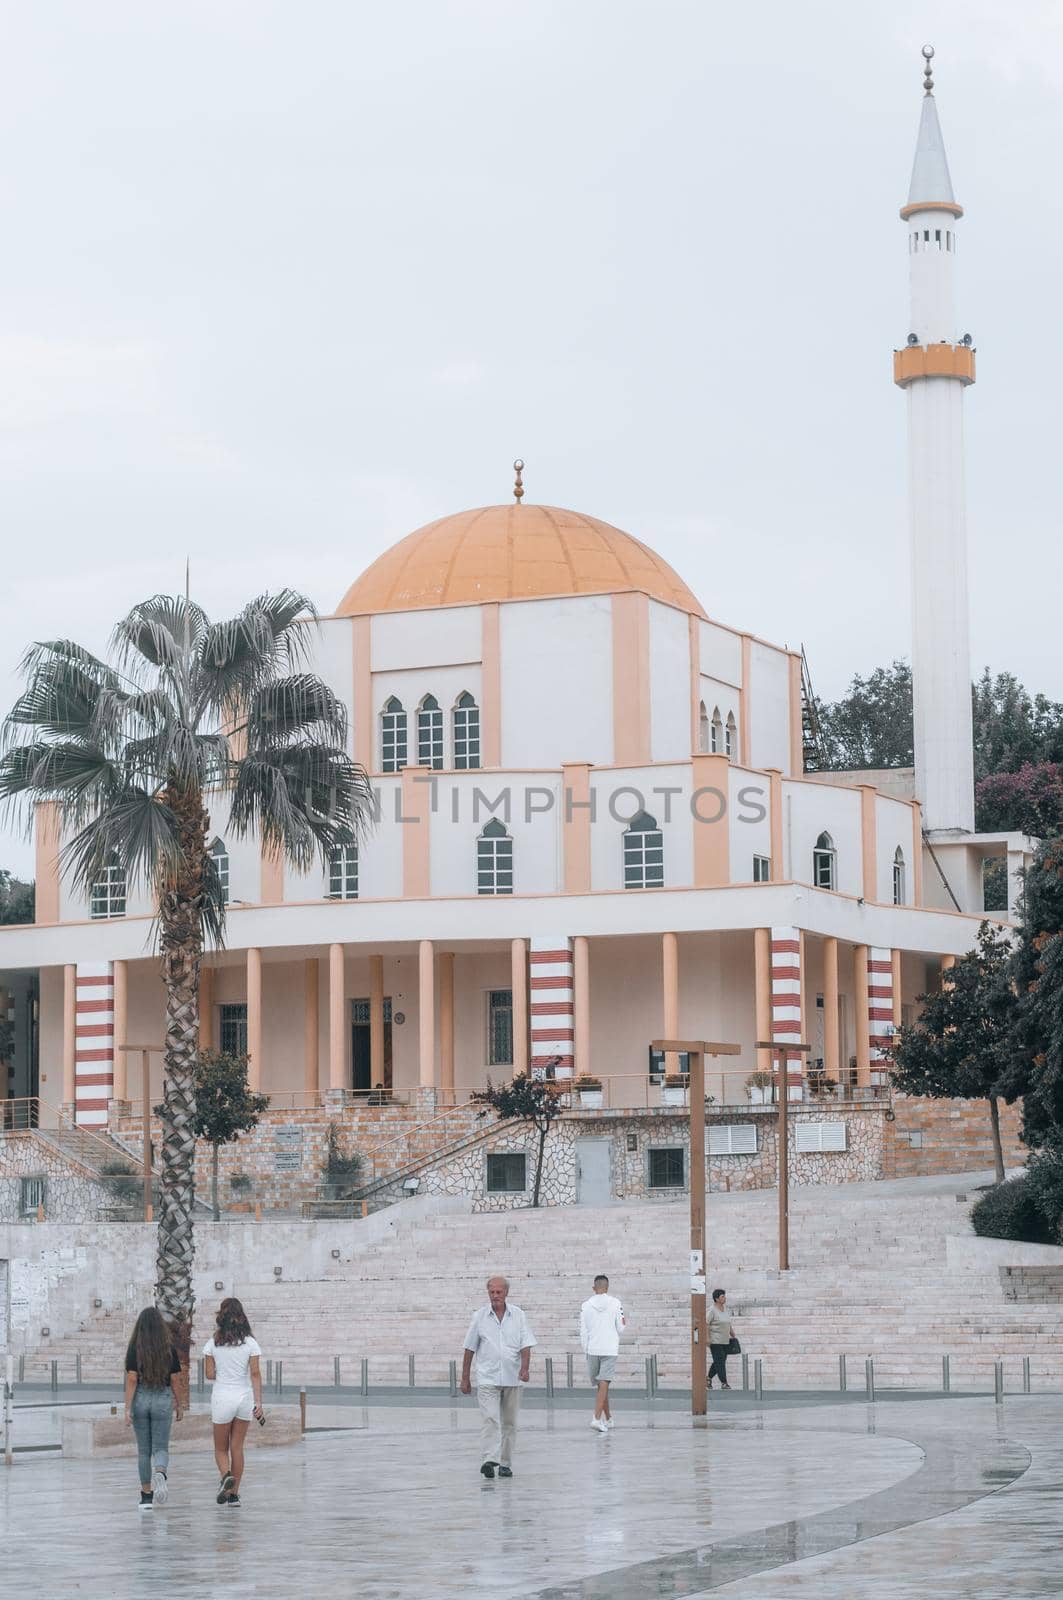 Albania, Durres September 2 2019: Great Mosque of Durres (or Grand Mosque of Durres, Fatih Mosque) in Durres town,